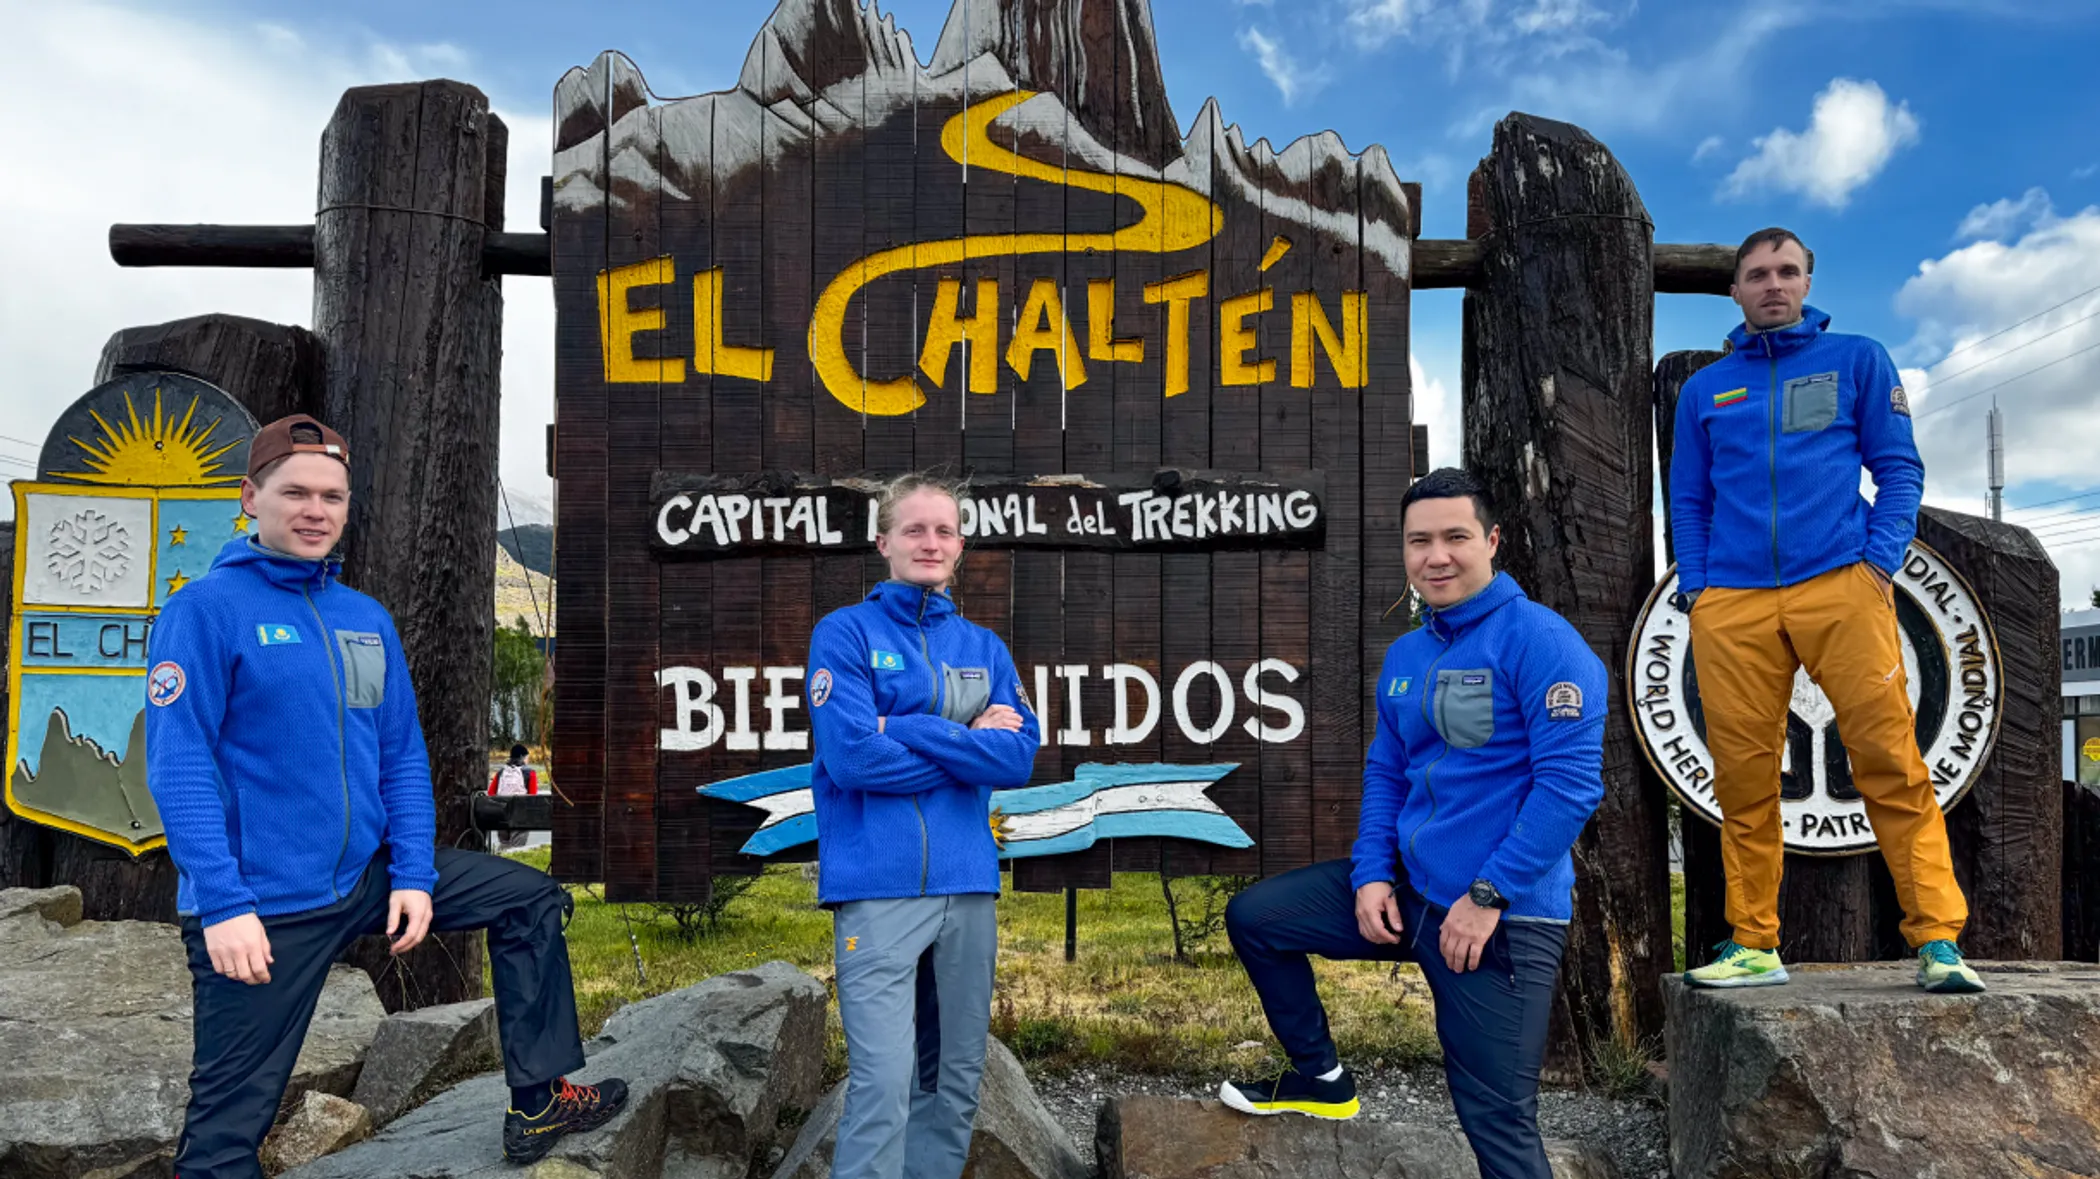 The team in the village of El Chalten, the gateway to the mountain trails of Cerro Torre and Fitz Roy